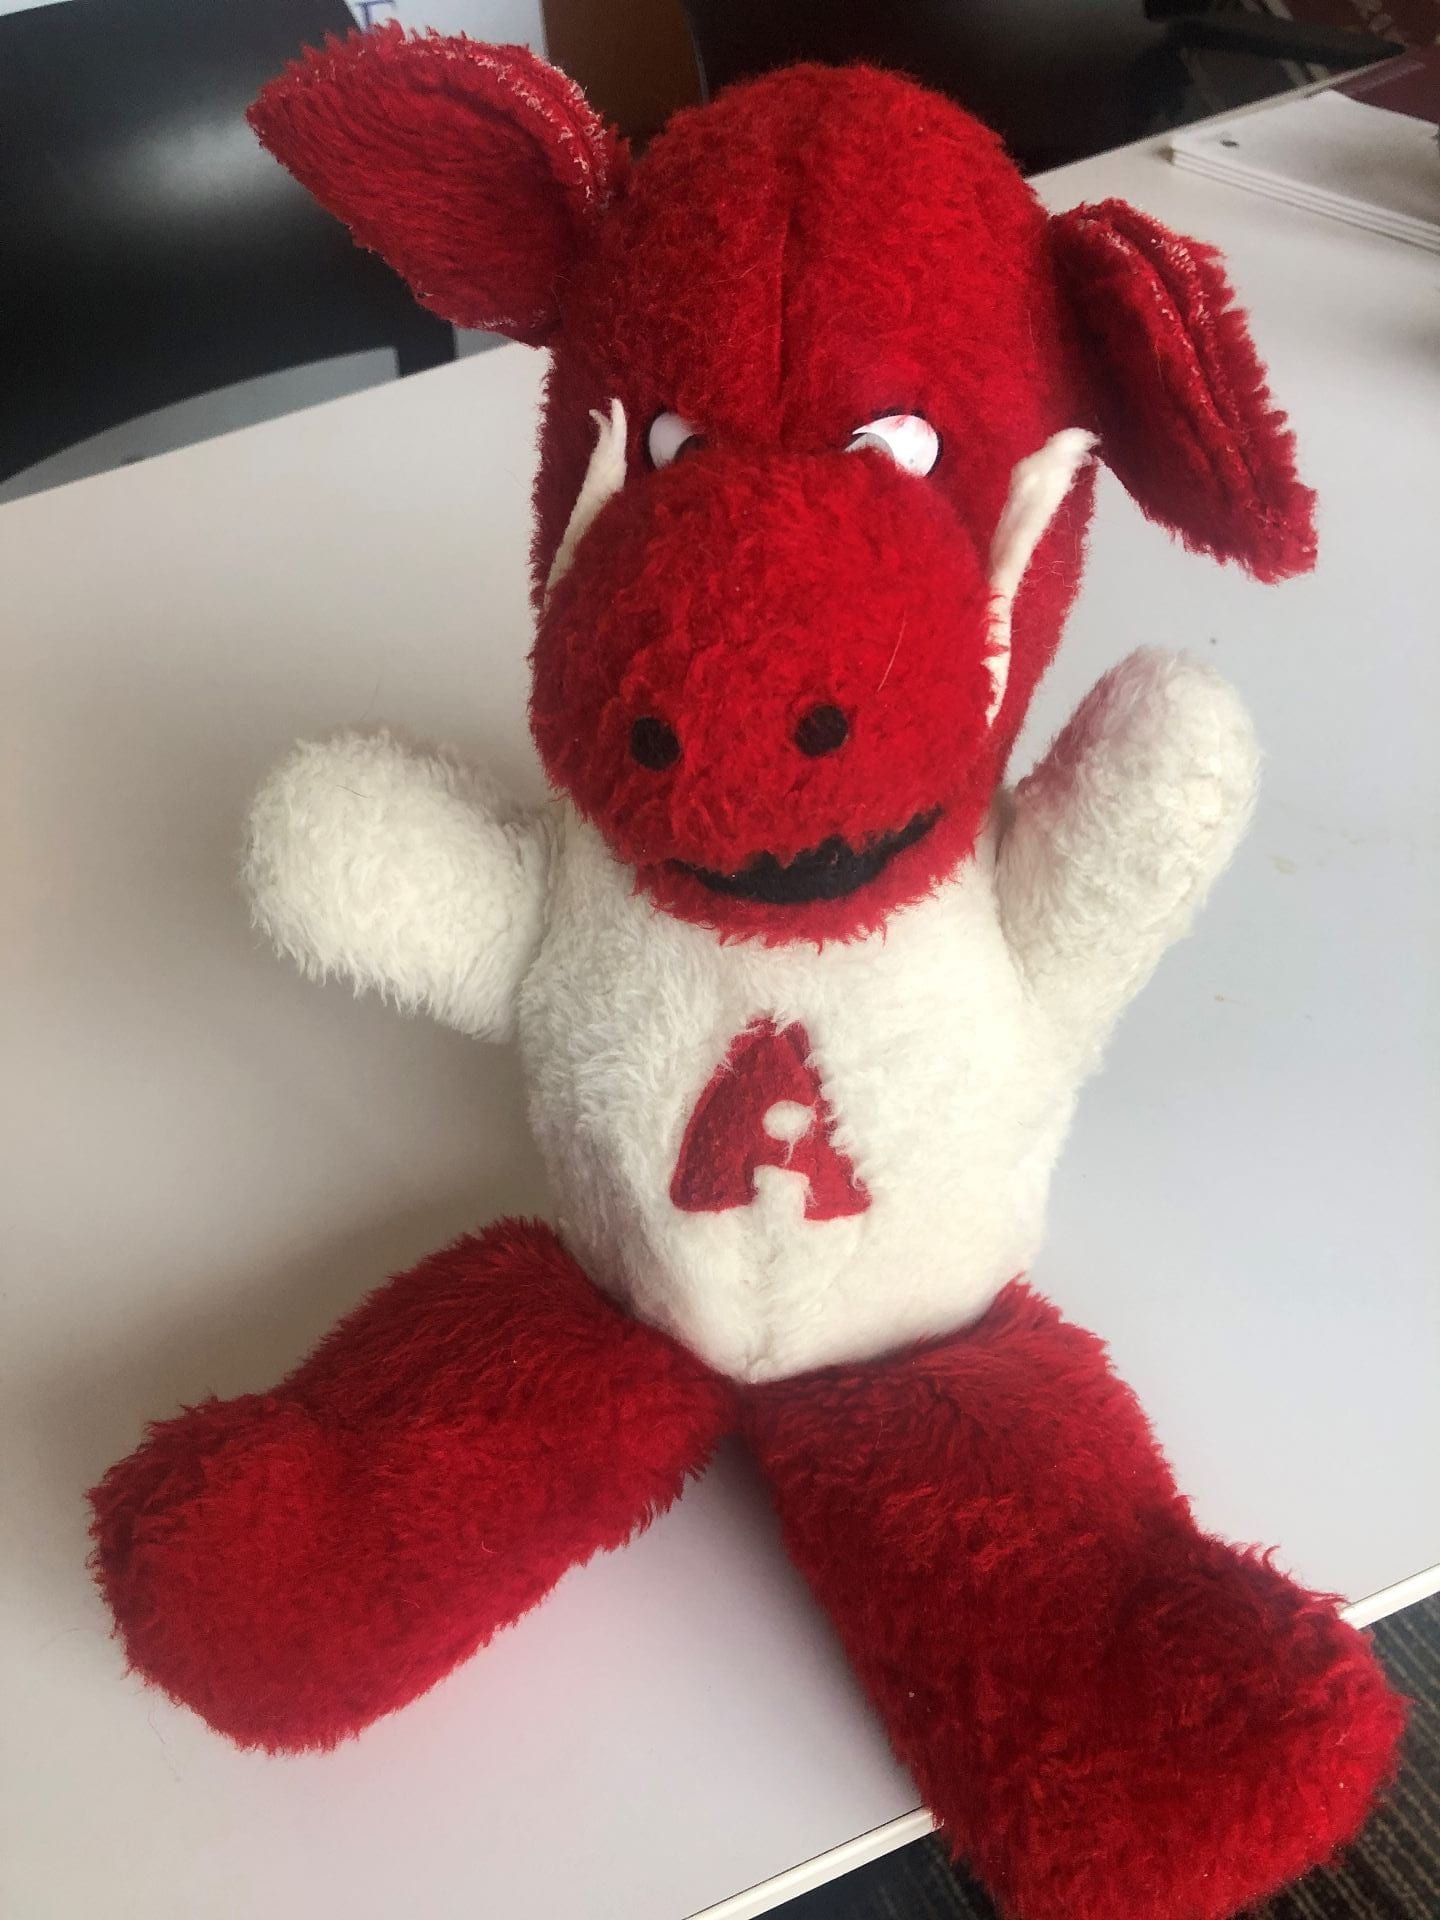 A Razorback plush with a red head and legs and white torso that has a red "A" in the center.